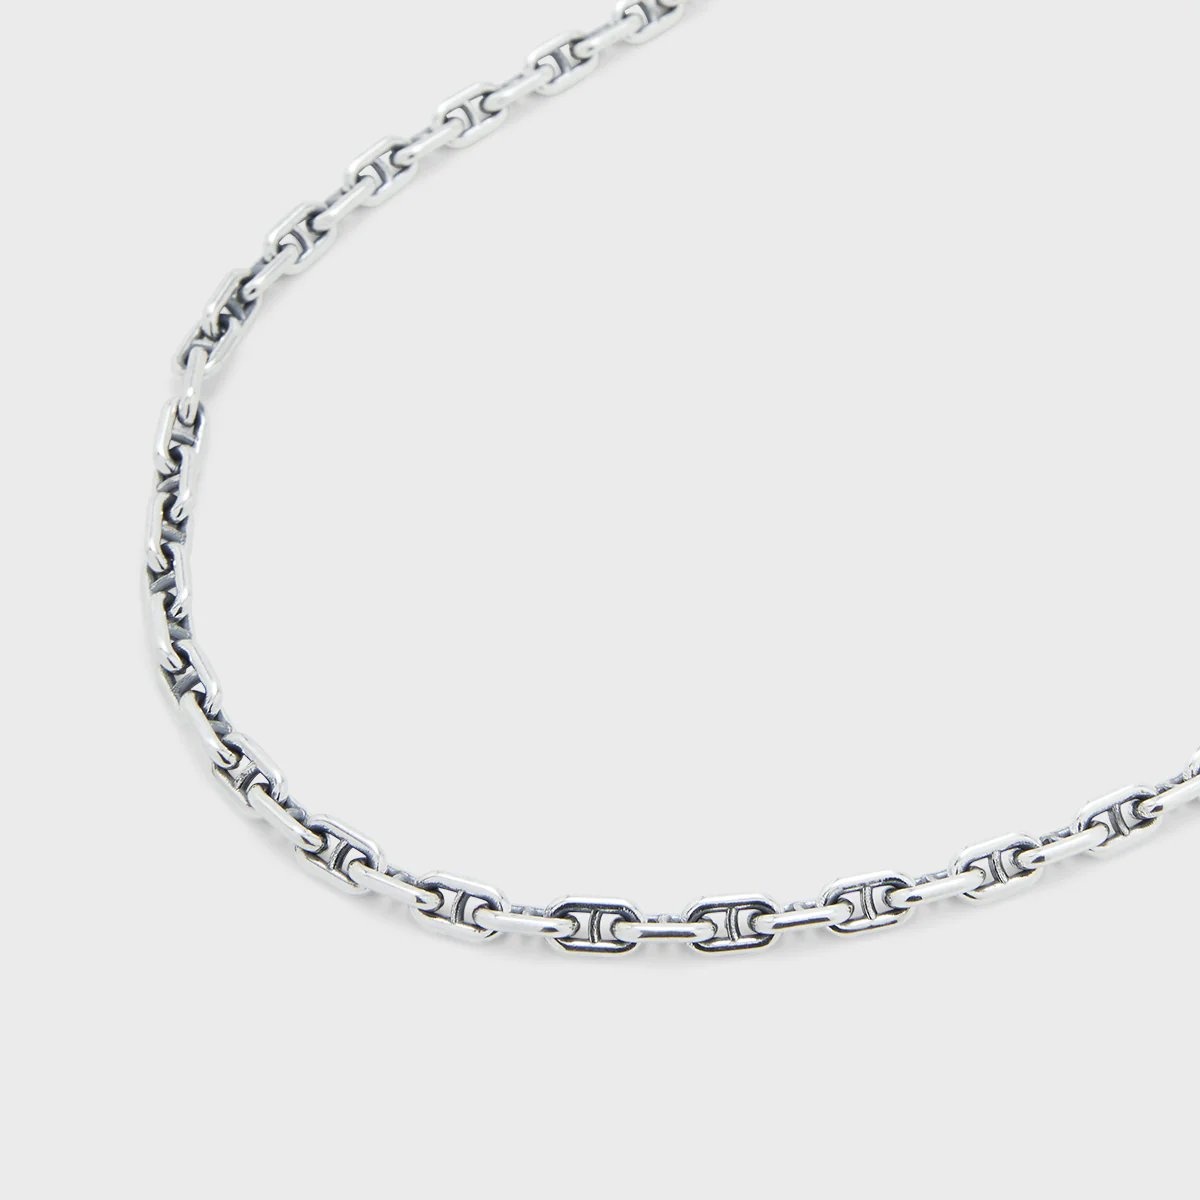 CS-M22-3A24 GOOD ART HLYWD Model 22 Necklace Link Size 3A At 24'' - Sterling Silver - 3